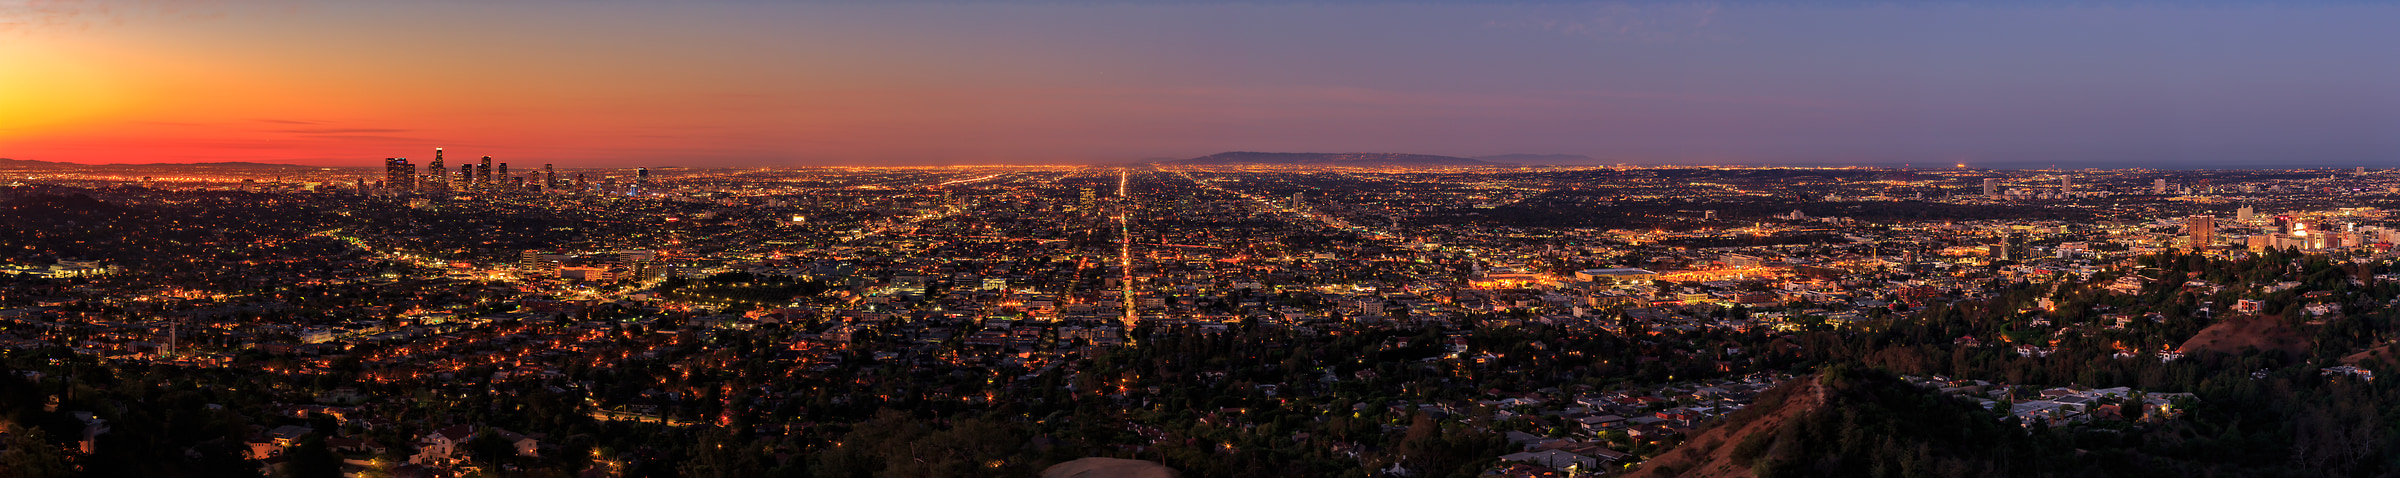 172 megapixels! A very high resolution, large-format VAST photo print of the Los Angeles and Hollywood skyline in California at sunrise and sunset; landscape photo created by cityscape photographer Guido Brandt.